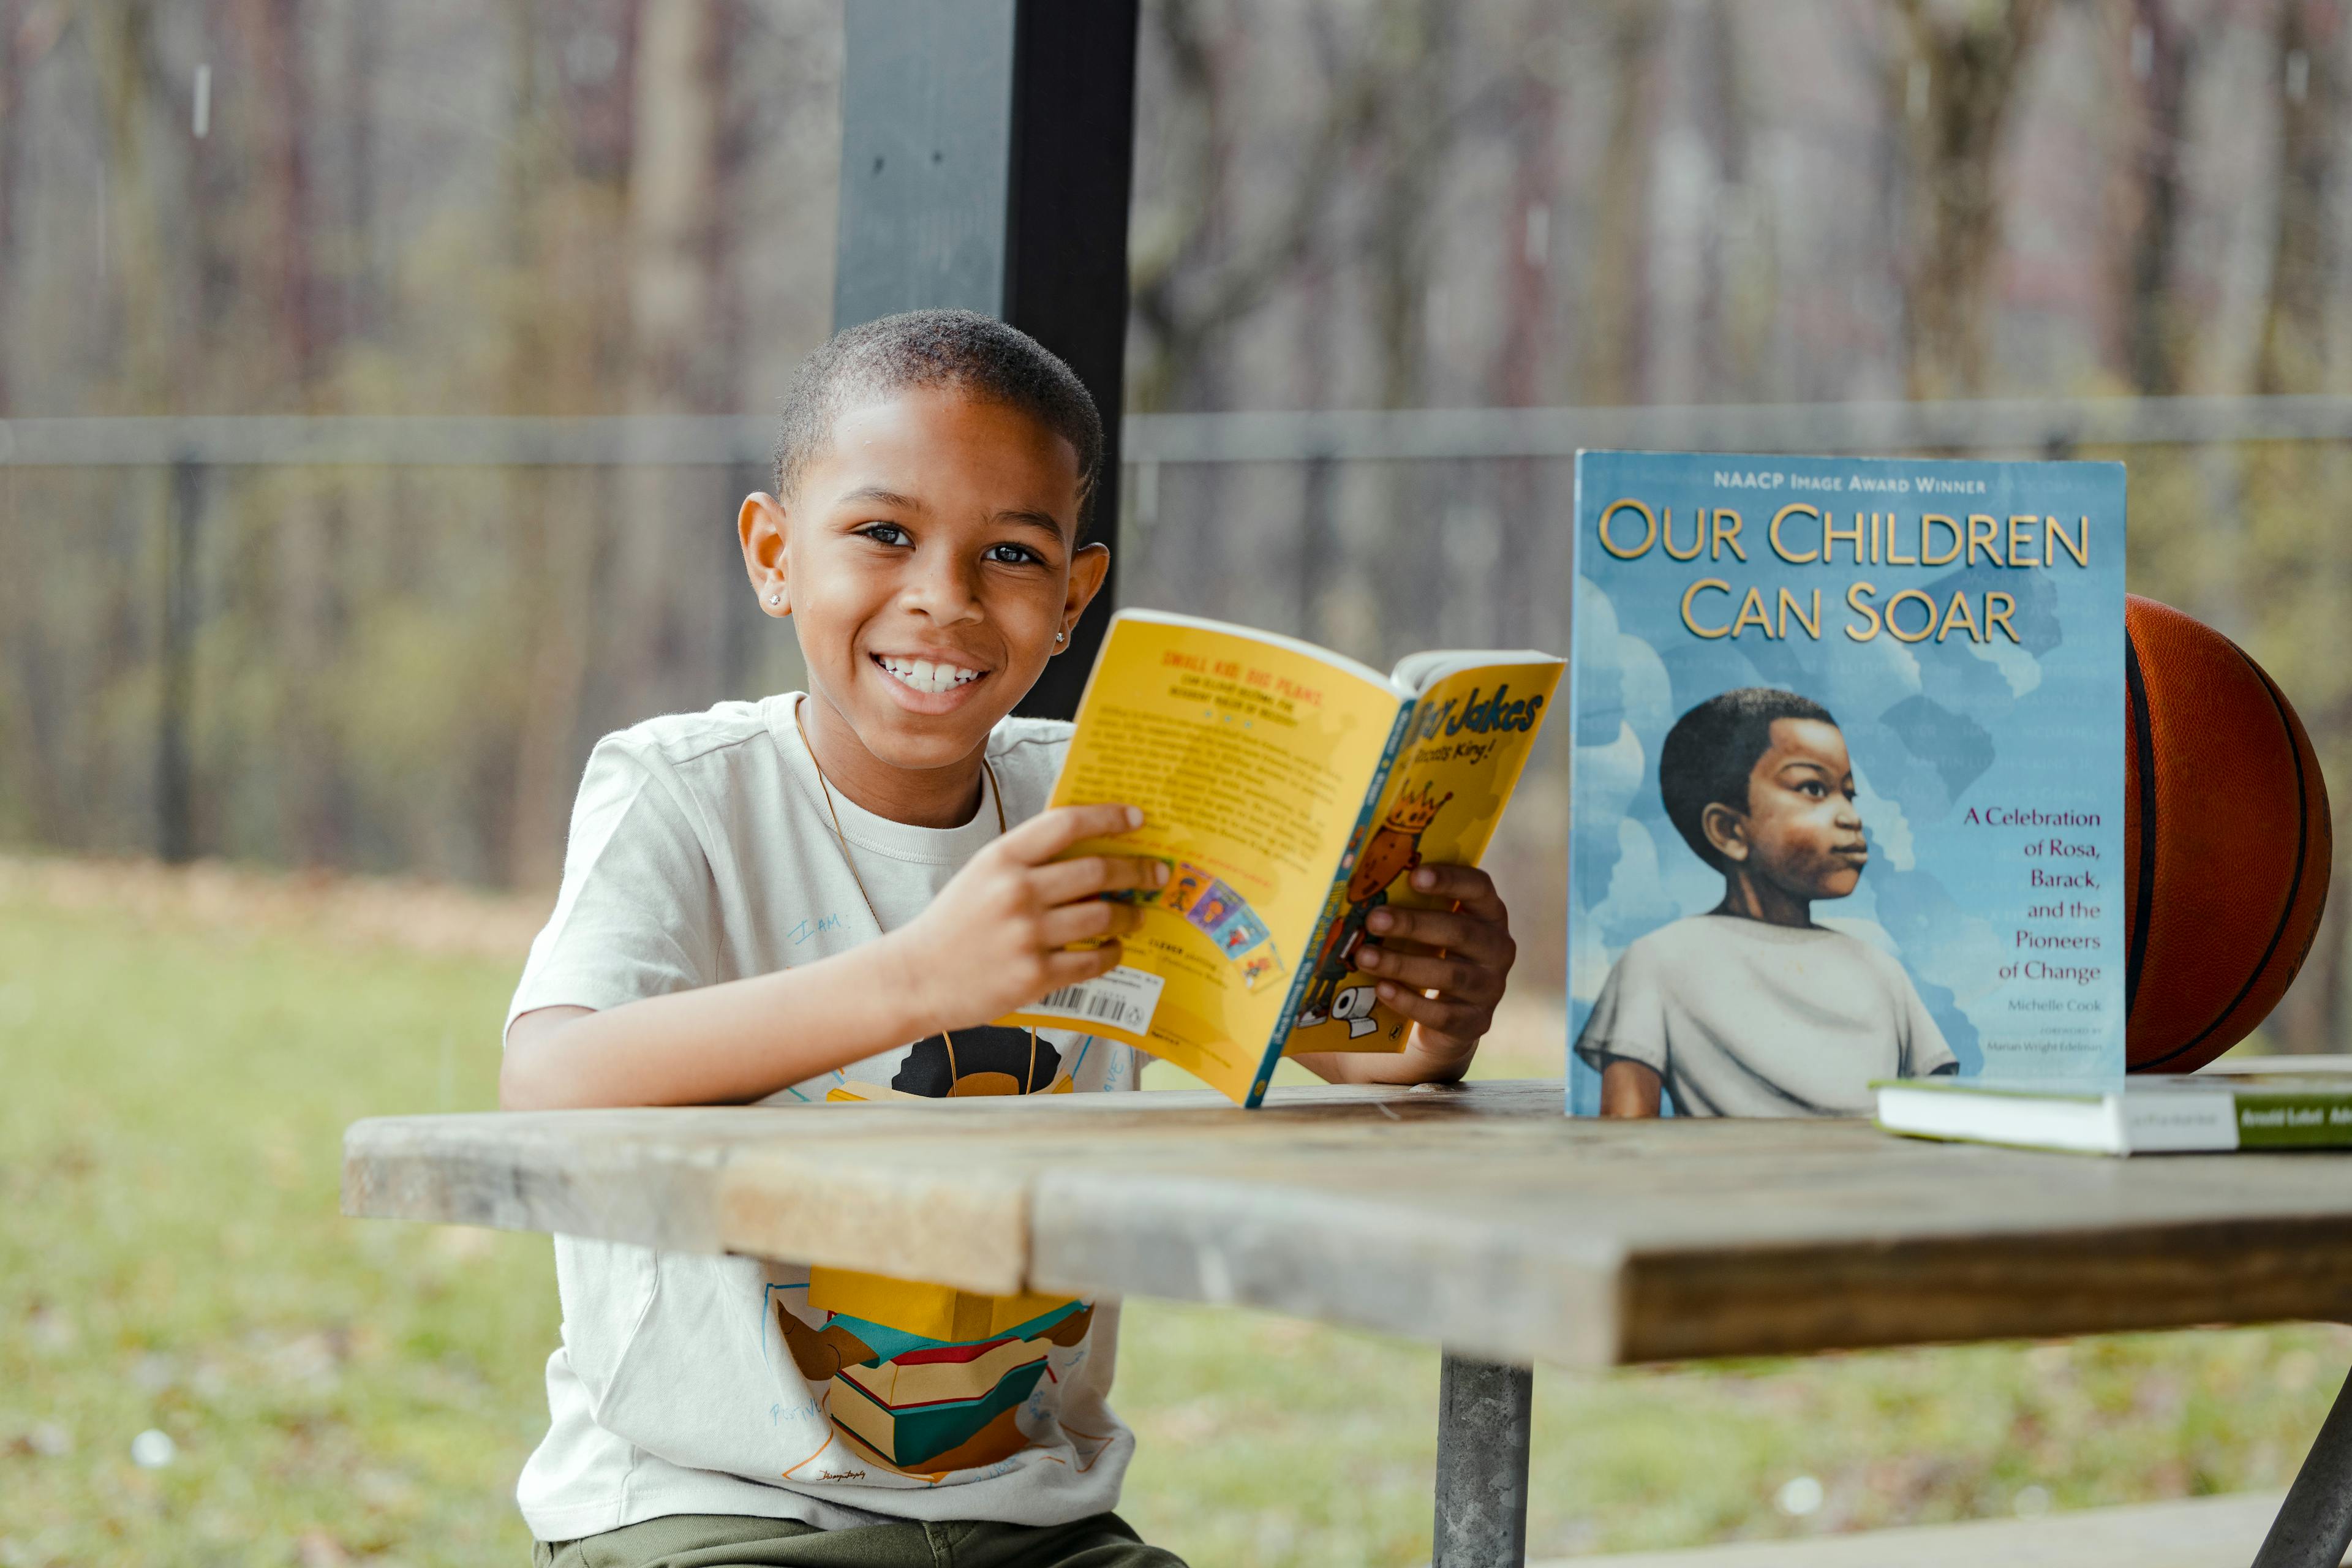 A smiling child reading a book at a picnic table with a basketball beside them.